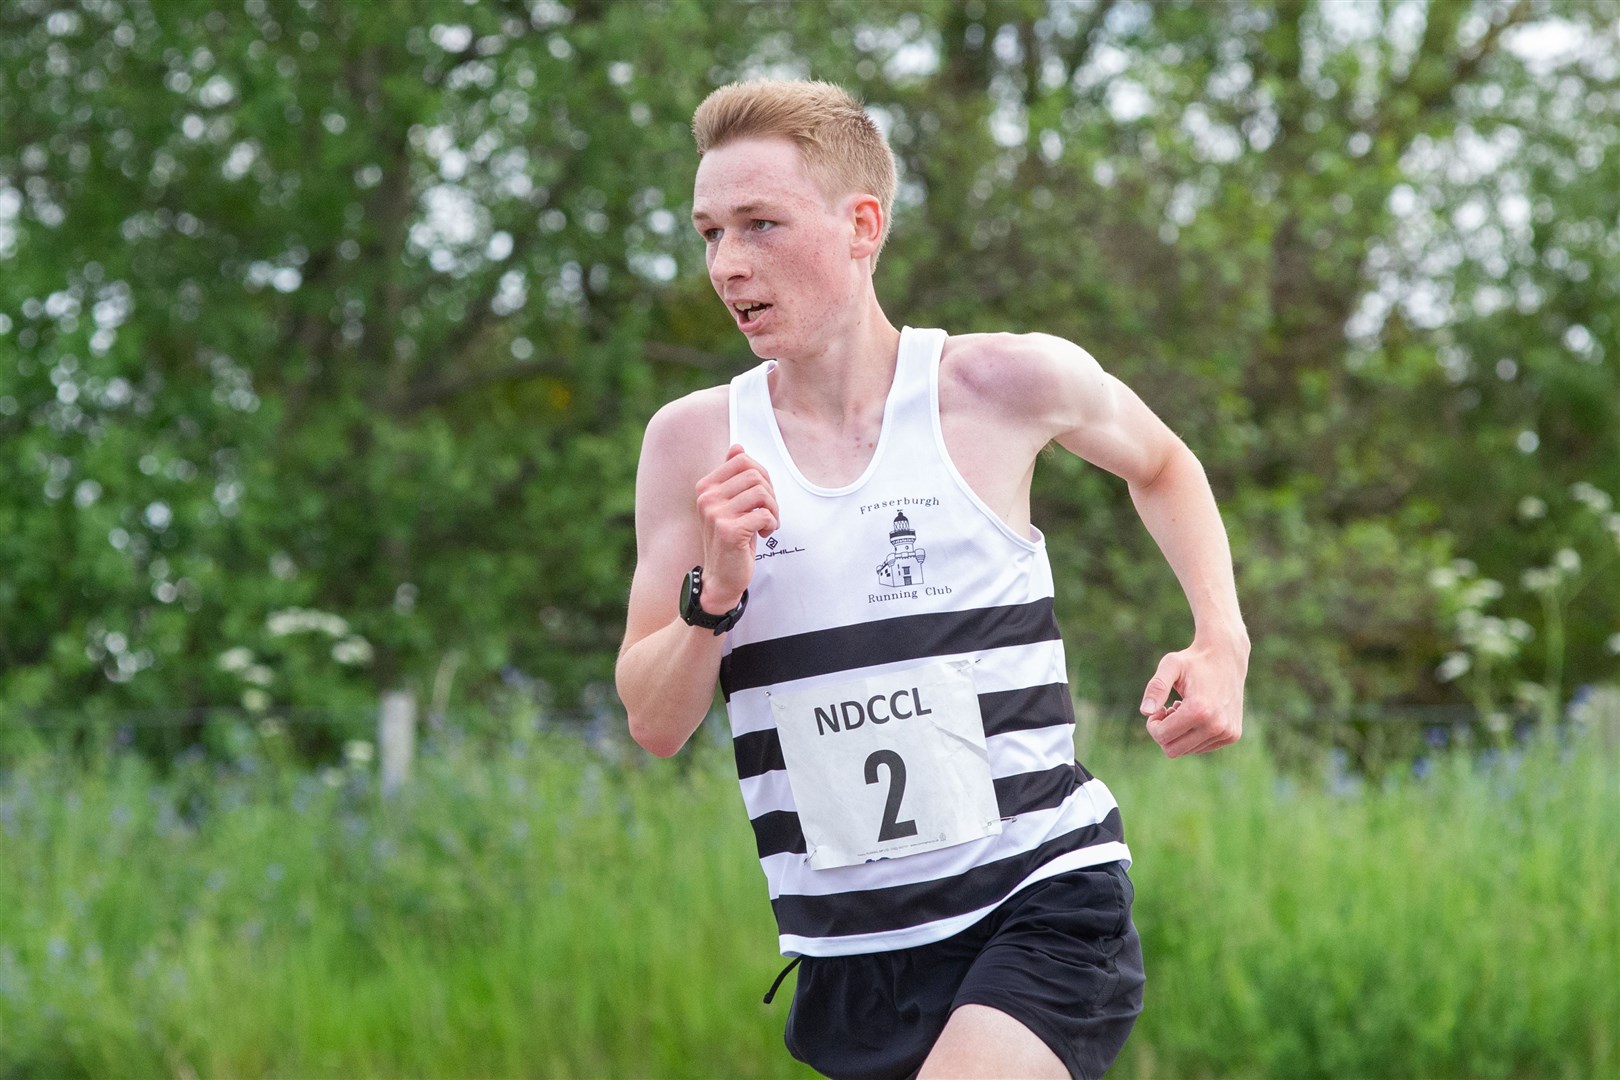 1st overall - #2 Max Abernethy with a time of 31:34...The Back to Basics 10k Road Race held on Sunday 6th June 2021 on the outskirts of Forres...Picture: Daniel Forsyth..